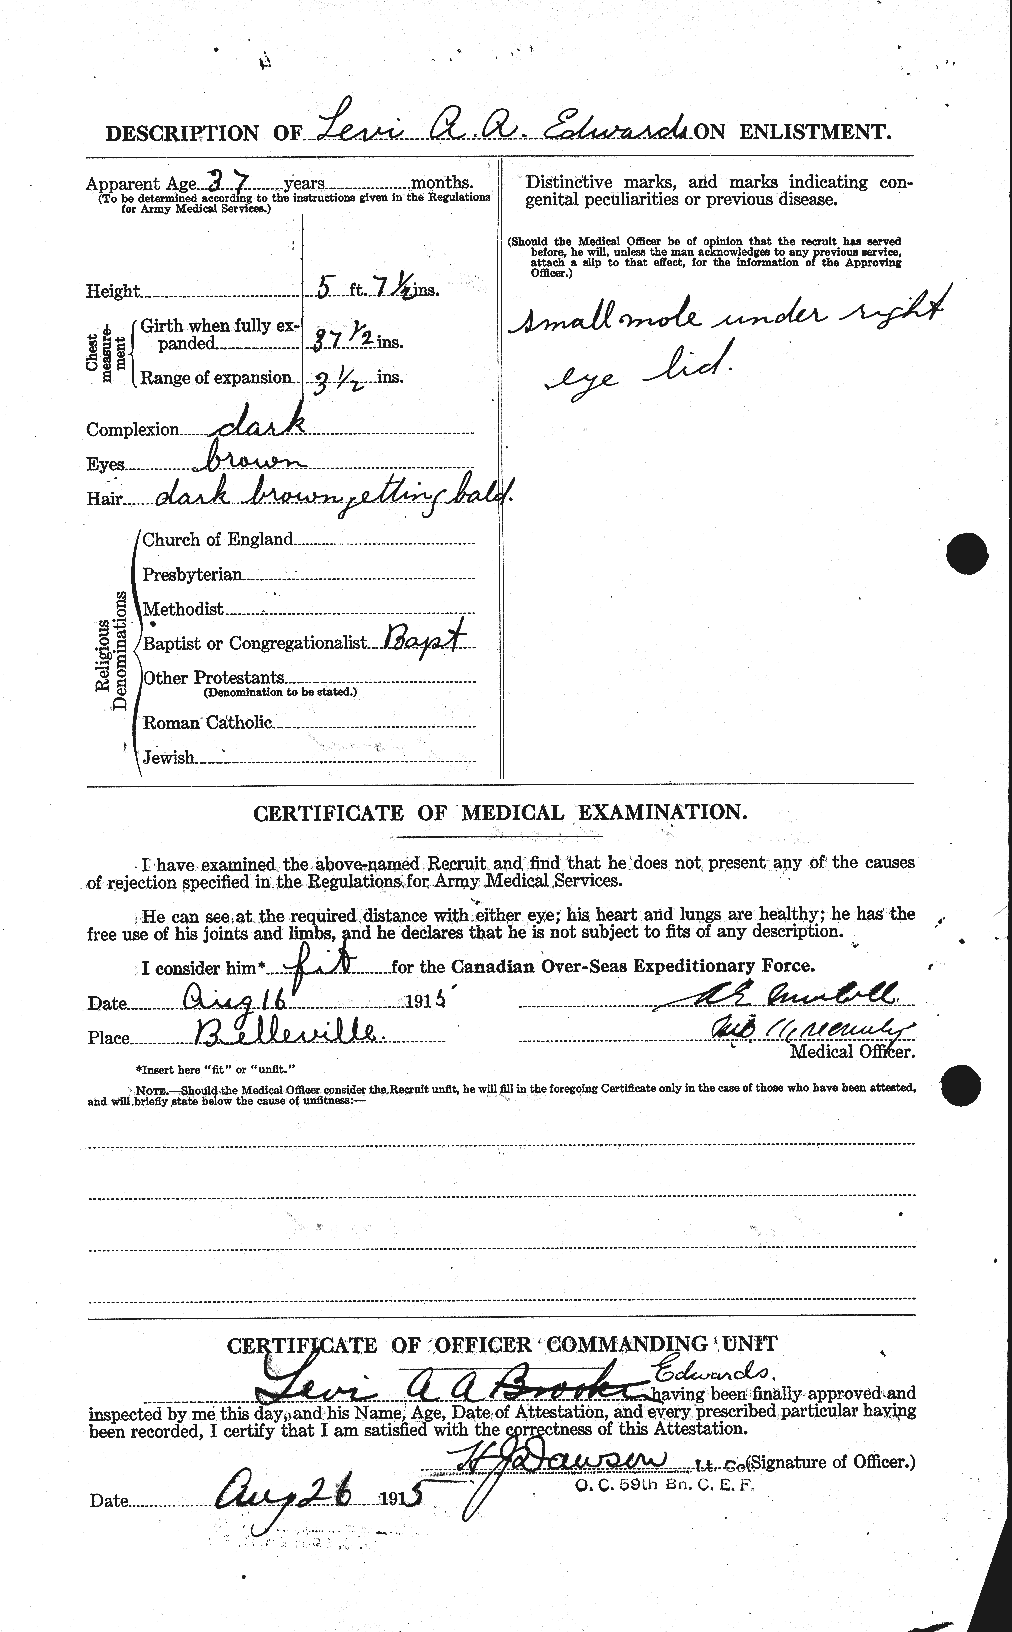 Personnel Records of the First World War - CEF 310201b